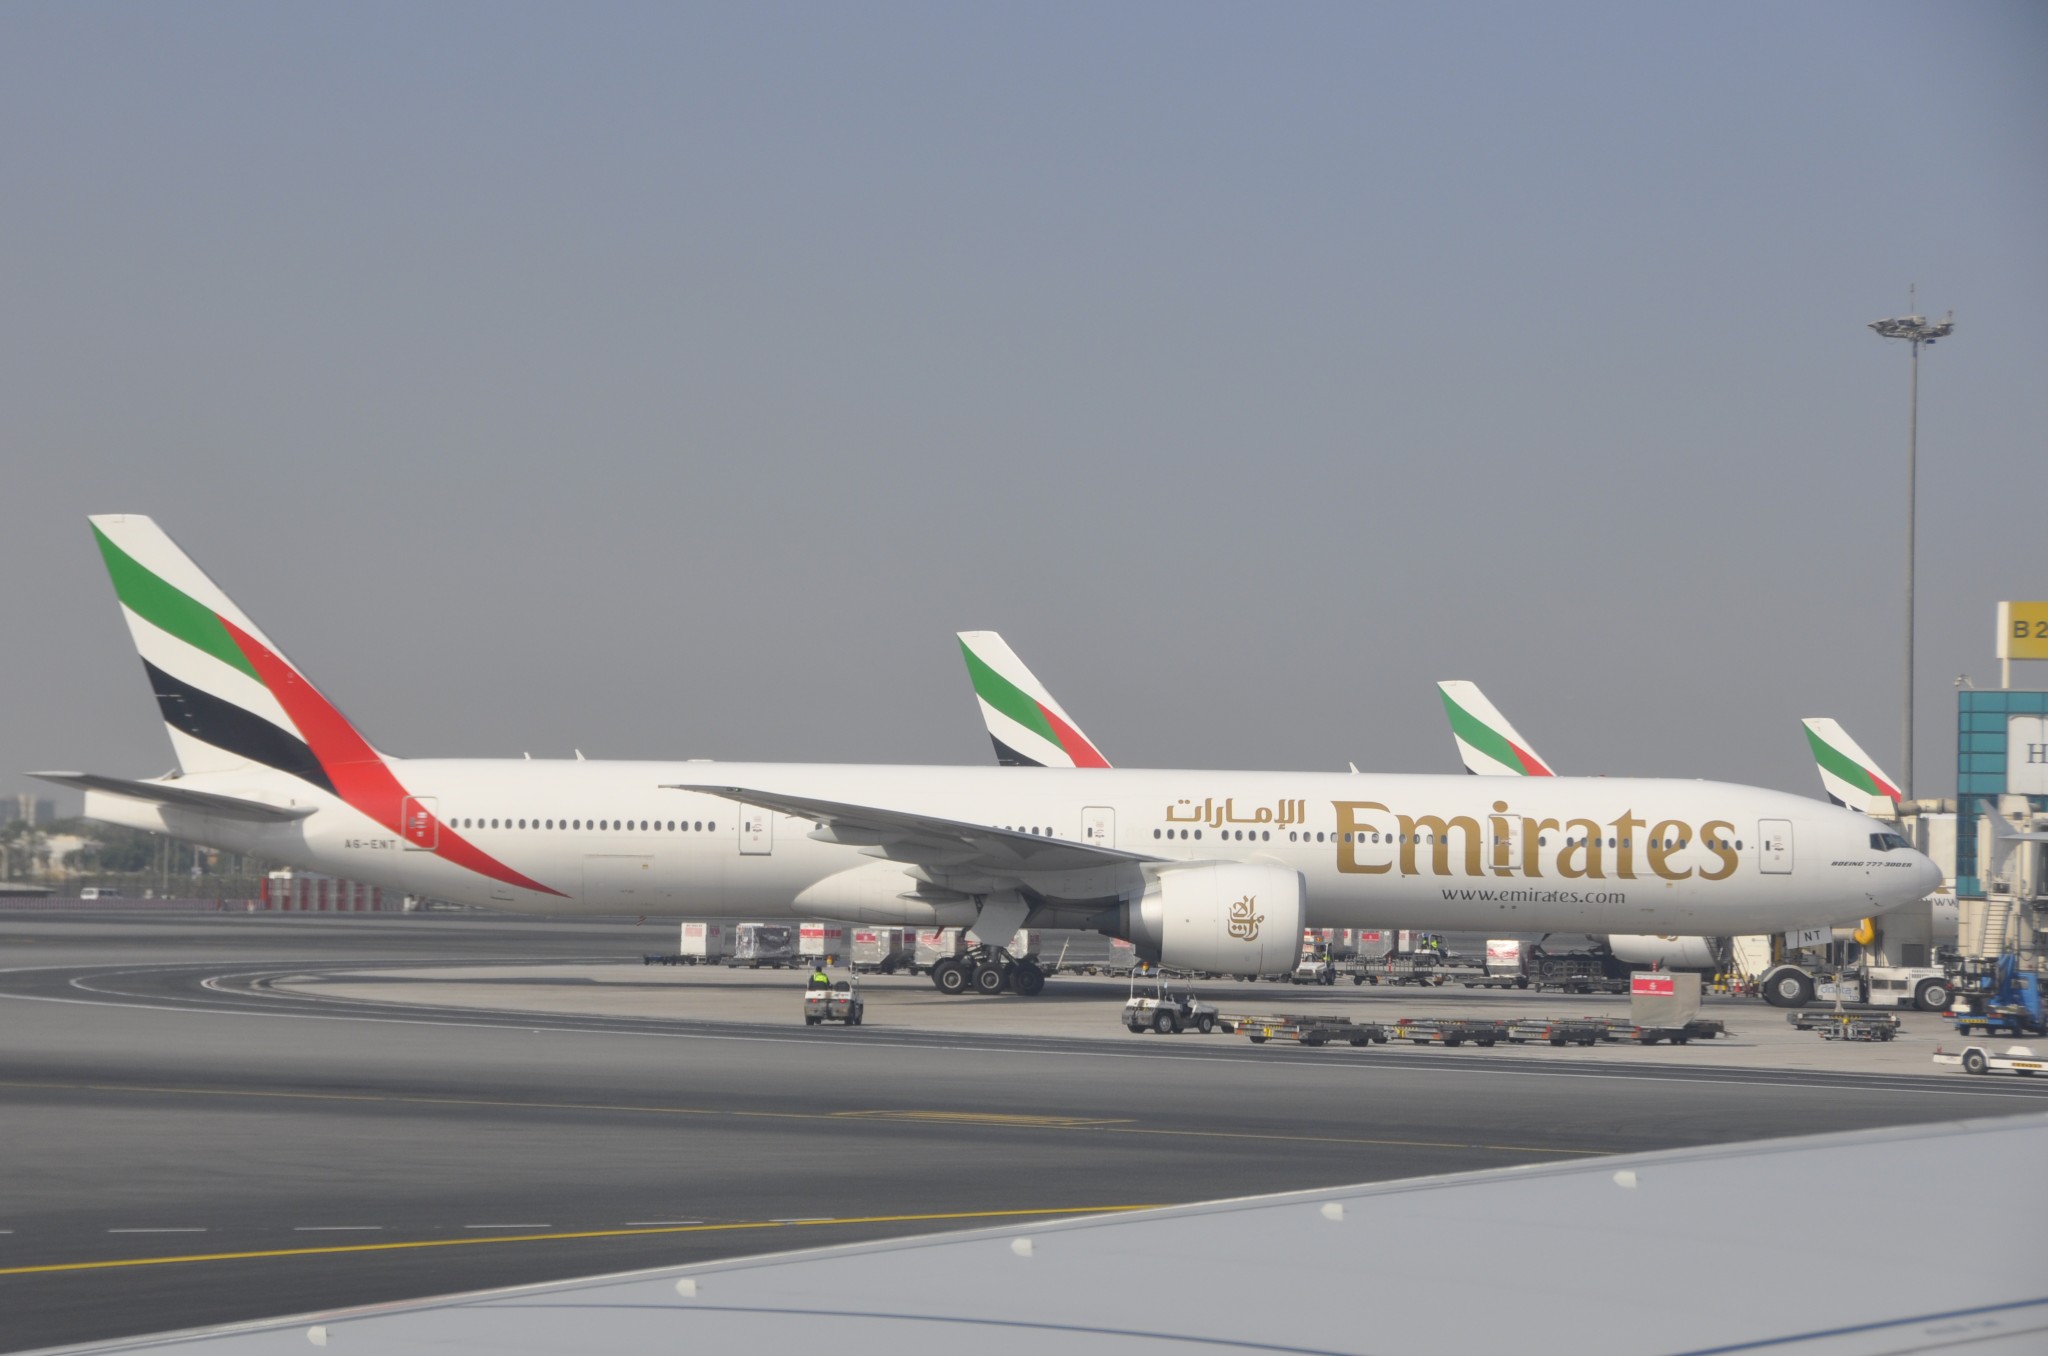 Emirates restarts flights to London Stansted with a daily service